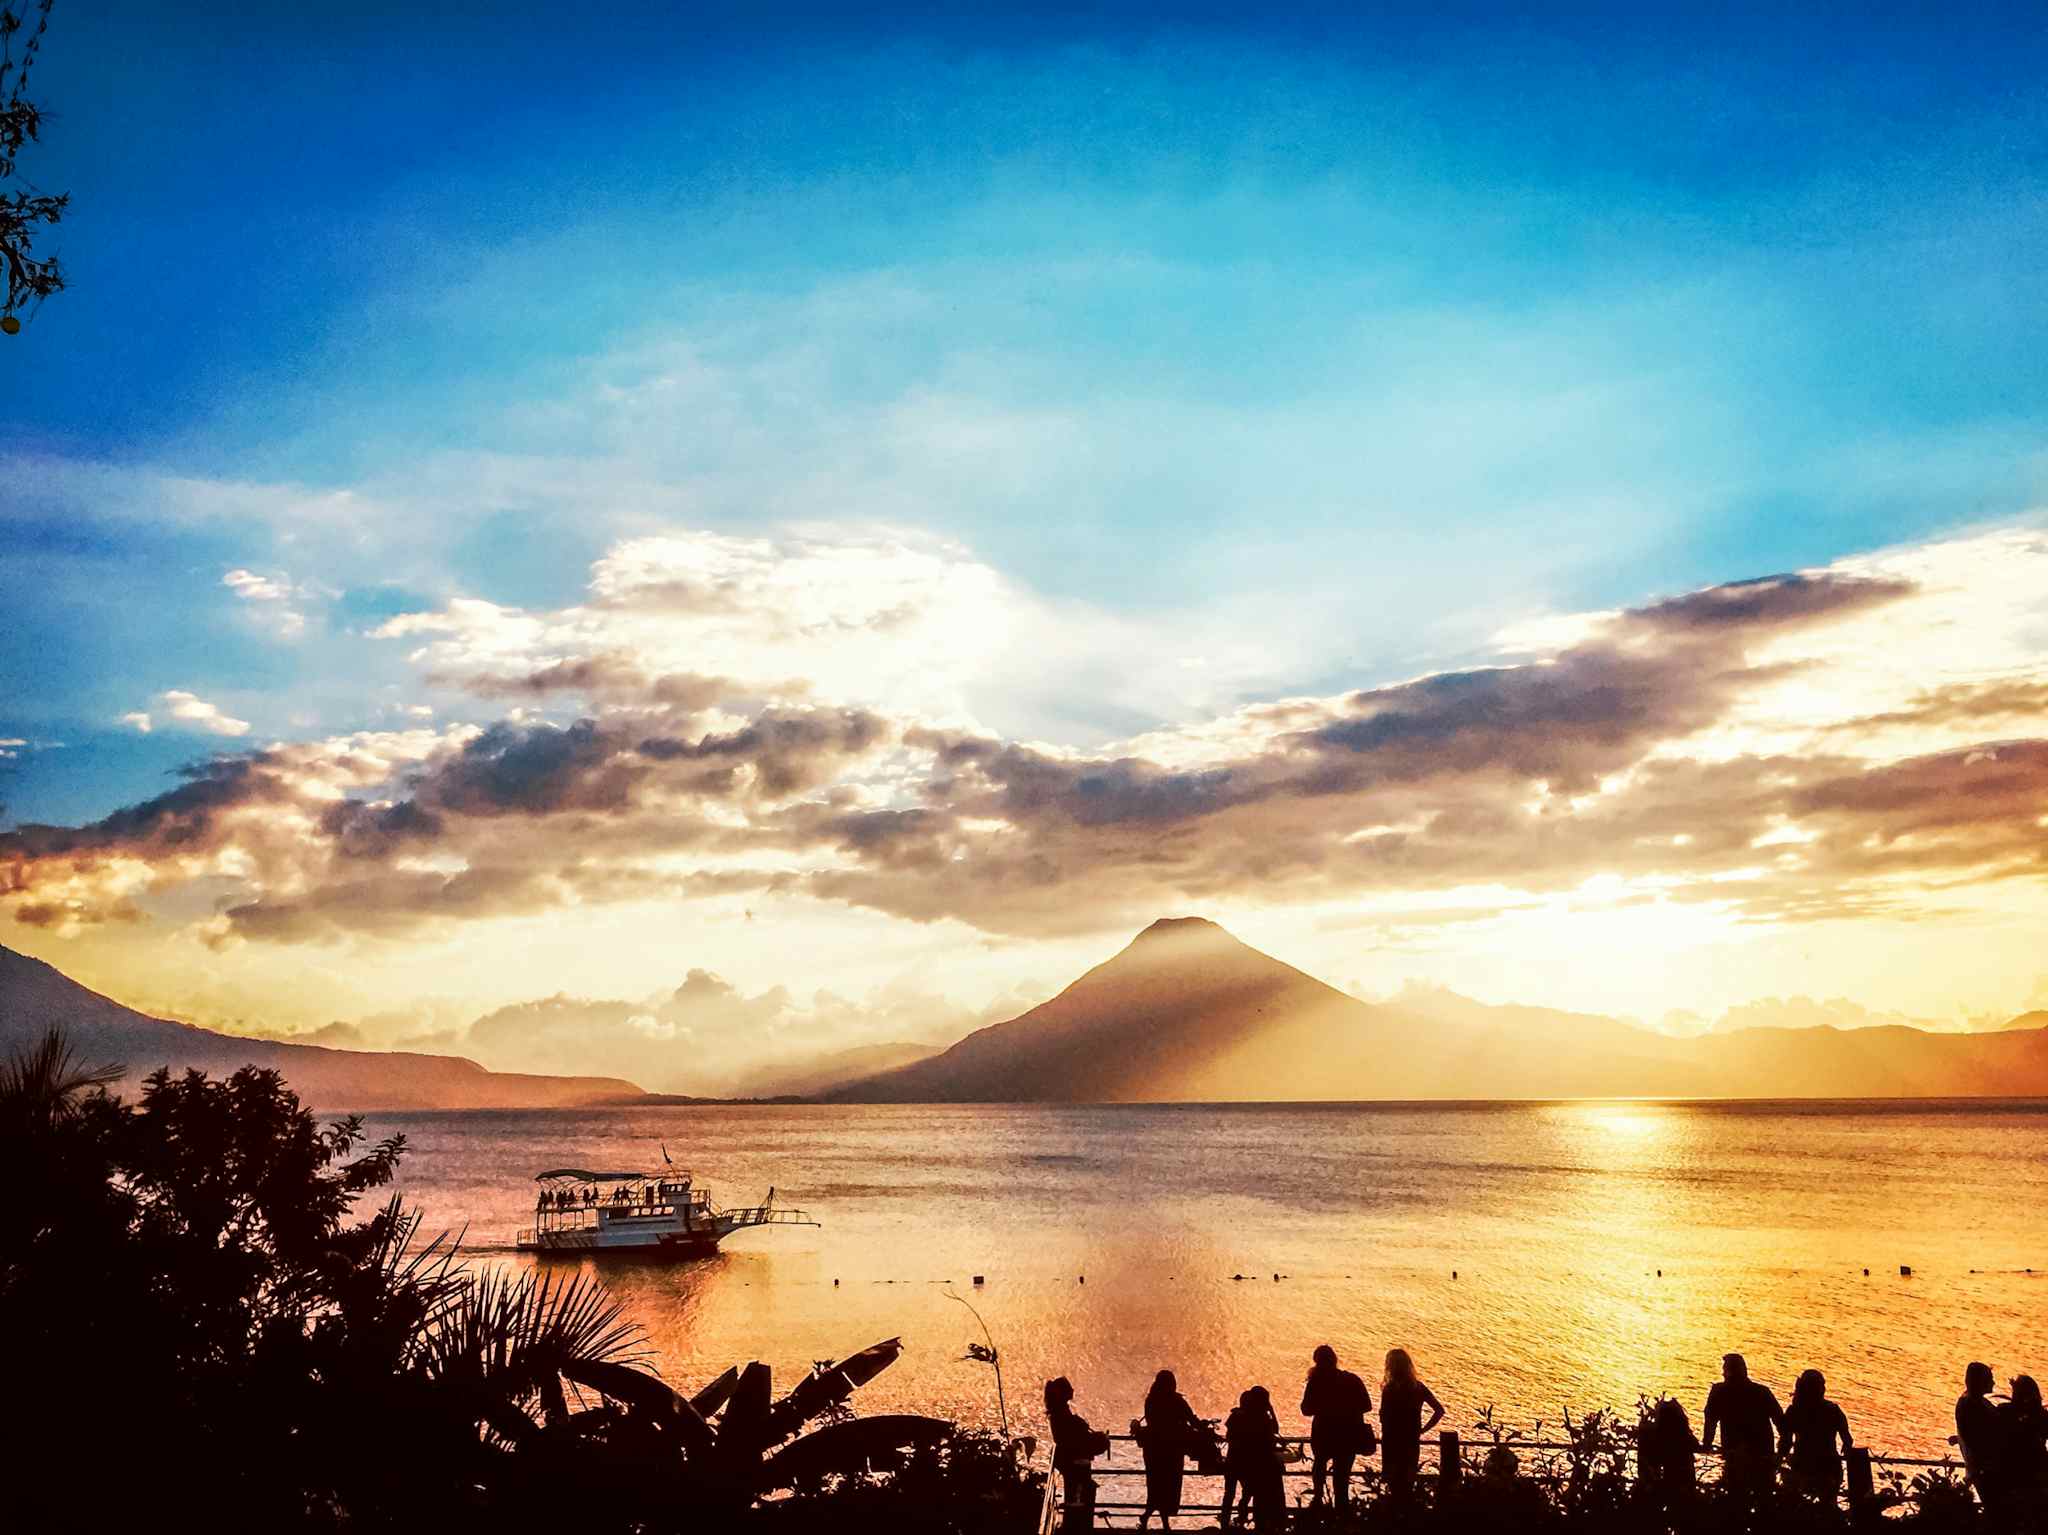 Lake Atitlan with beautiful sunset colours and the silhouette of volcanoes in the background, Guatemala.